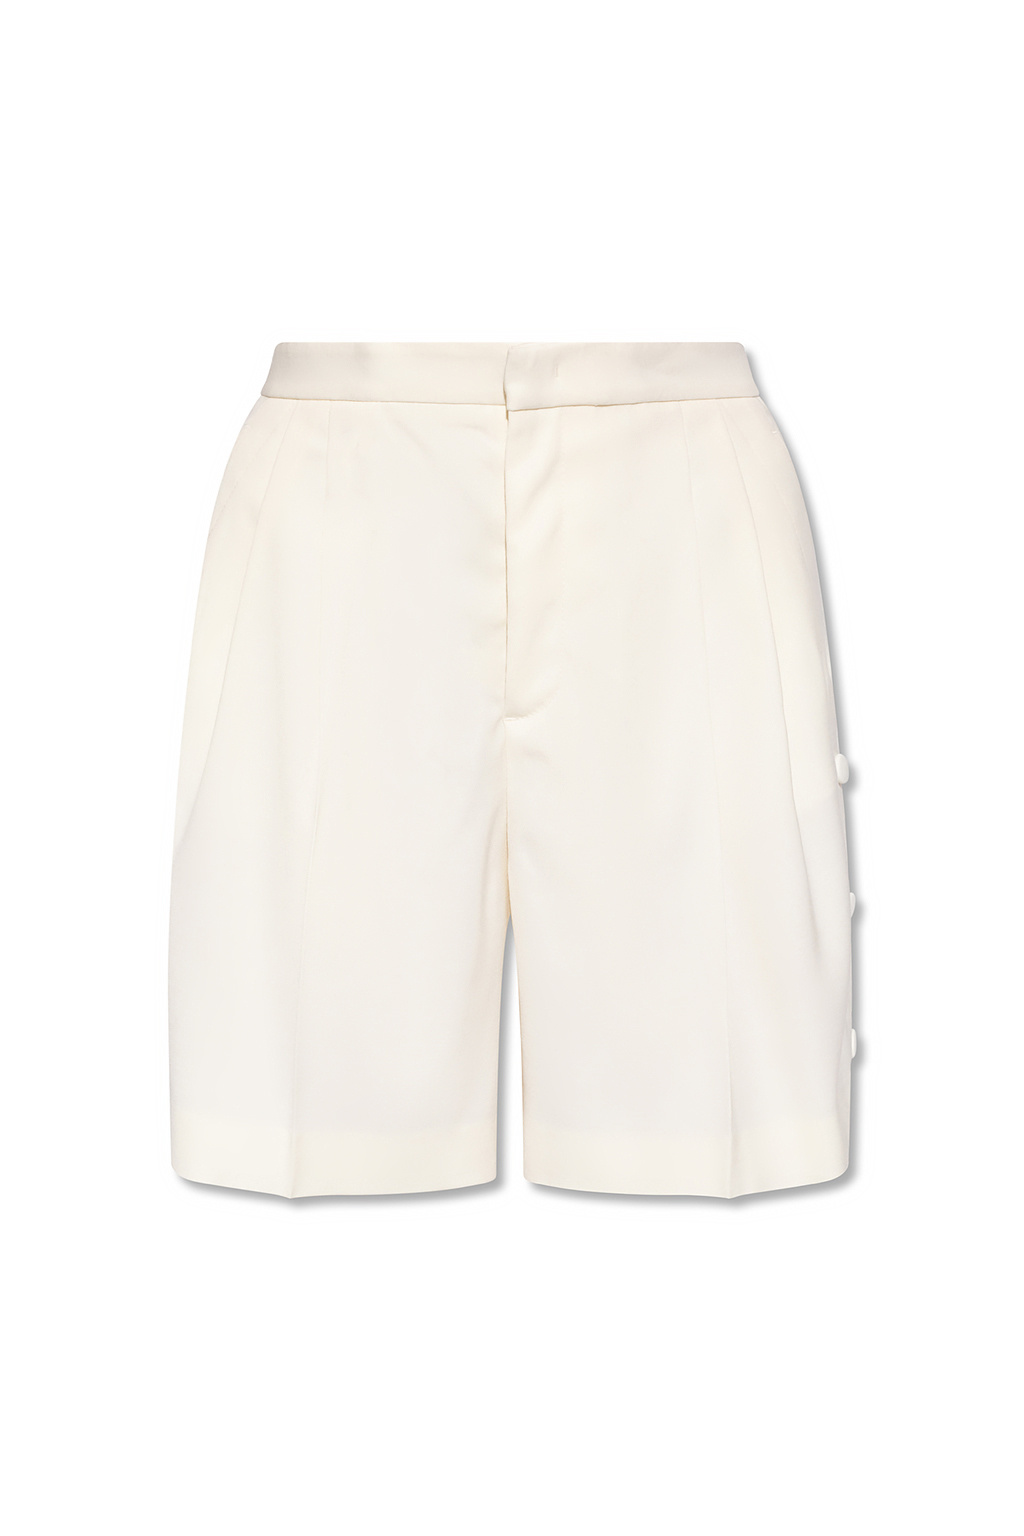 Red Valentino Pleated shorts